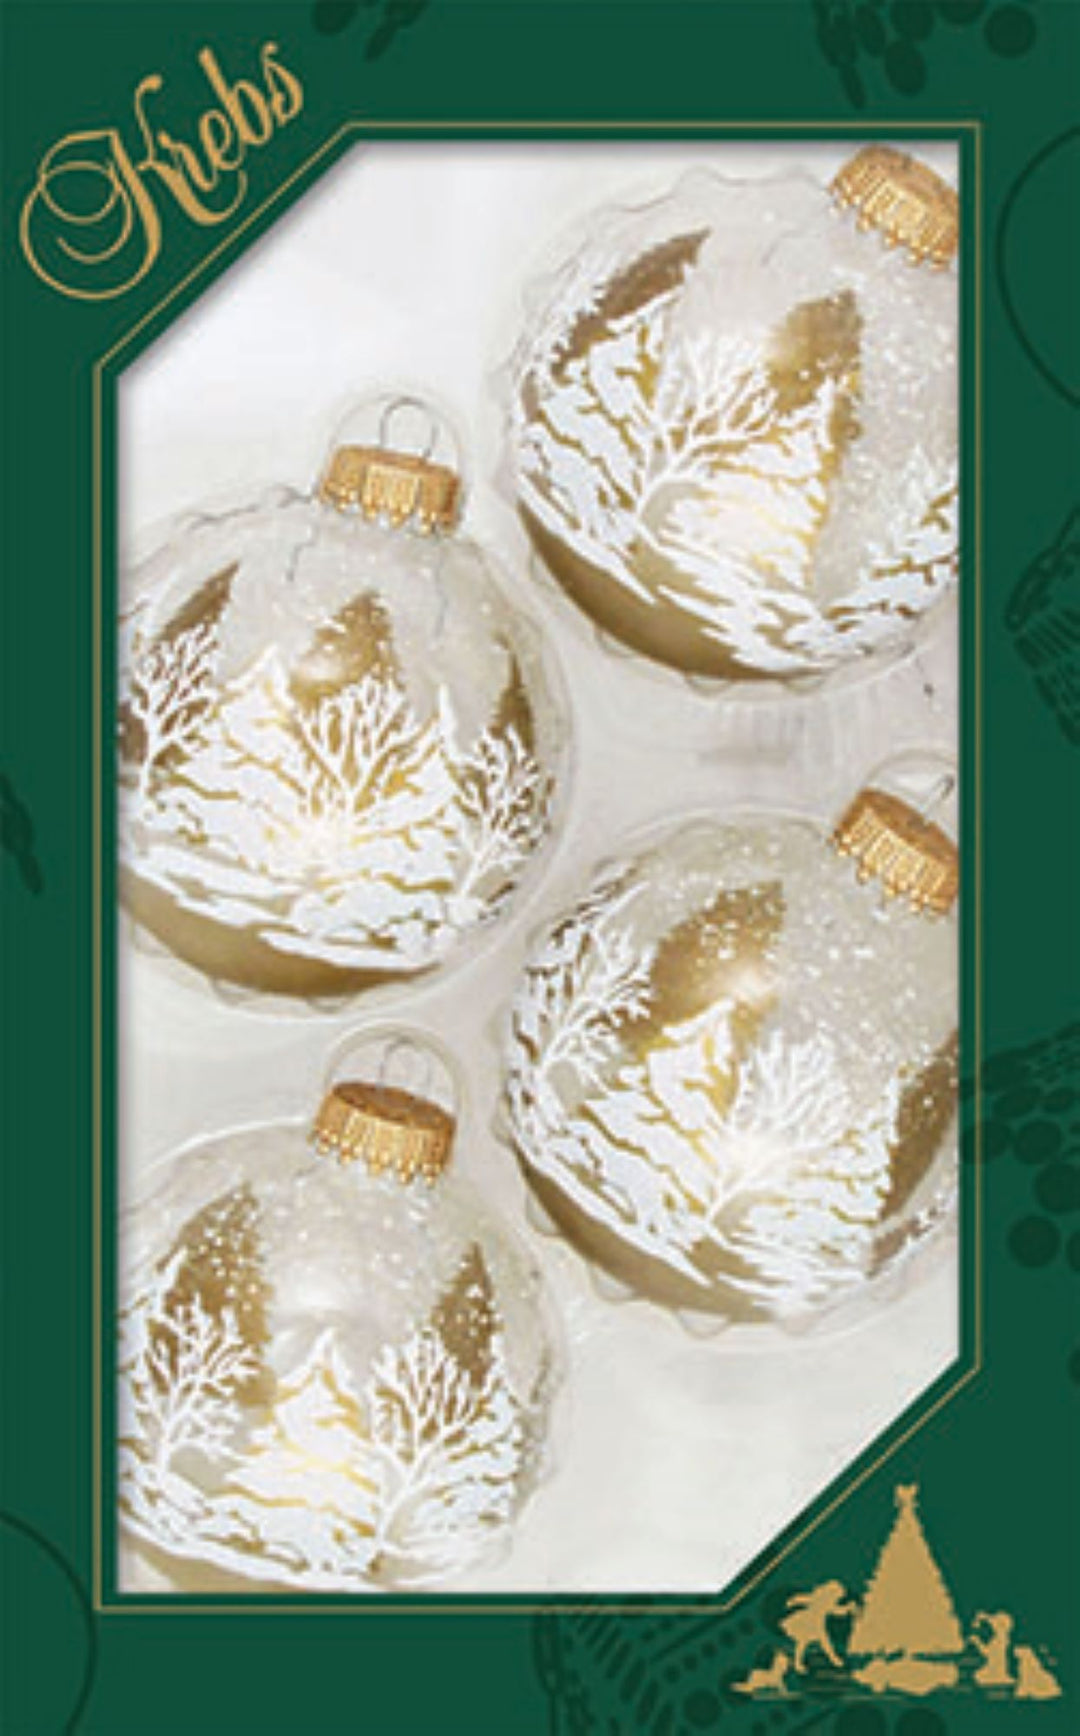 Glass Christmas Tree Ornaments - 67mm/2.63" [4 Pieces] Decorated Balls from Christmas by Krebs Seamless Hanging Holiday Decor (Clear with Gold & White Festive Trees)